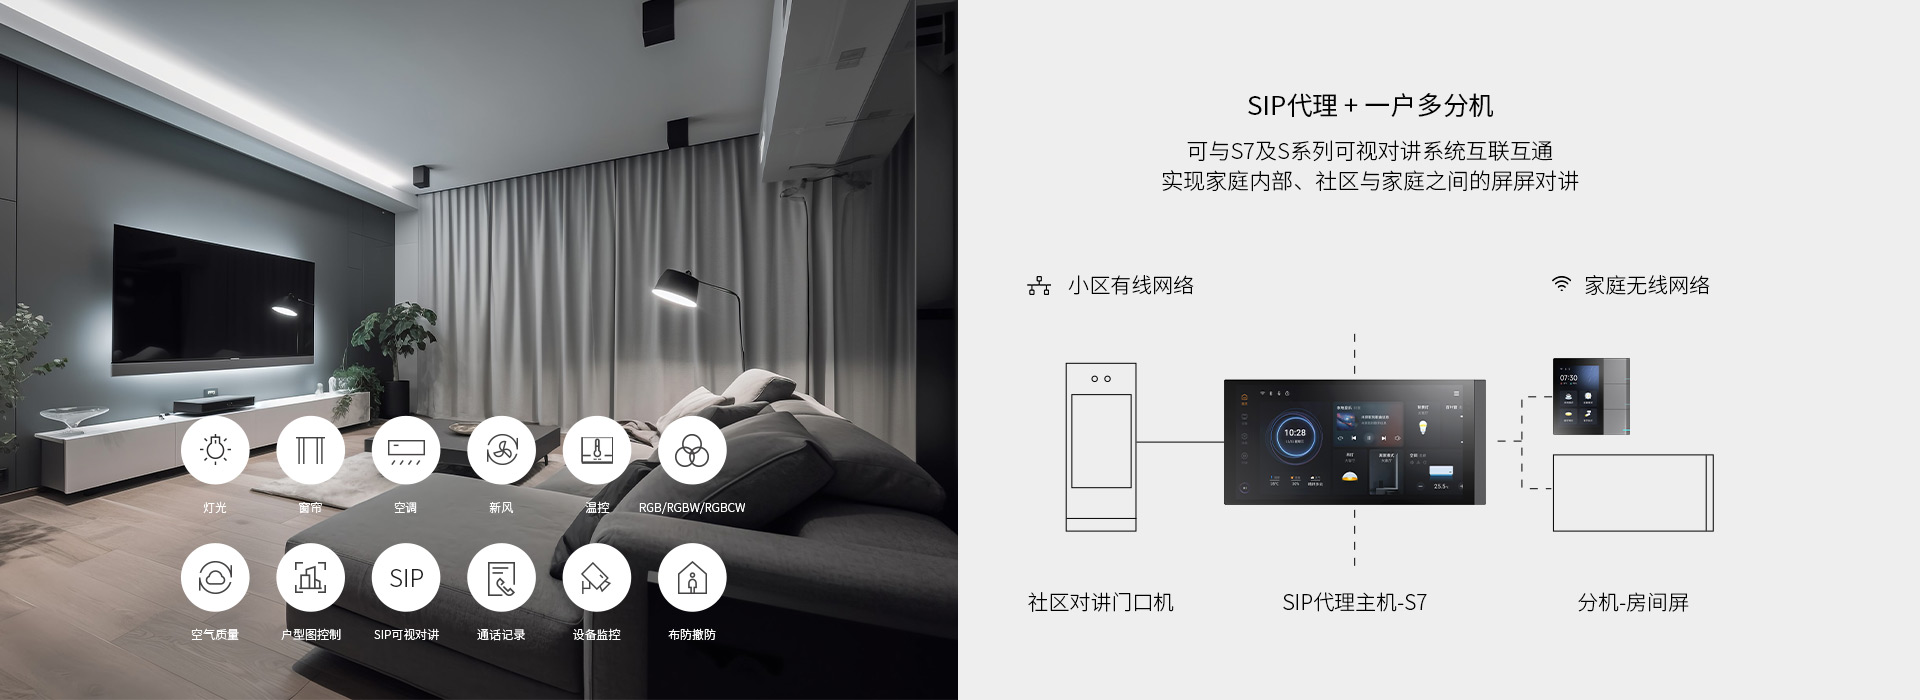 KNX+SIP双标准，全宅智能ALL IN ONE